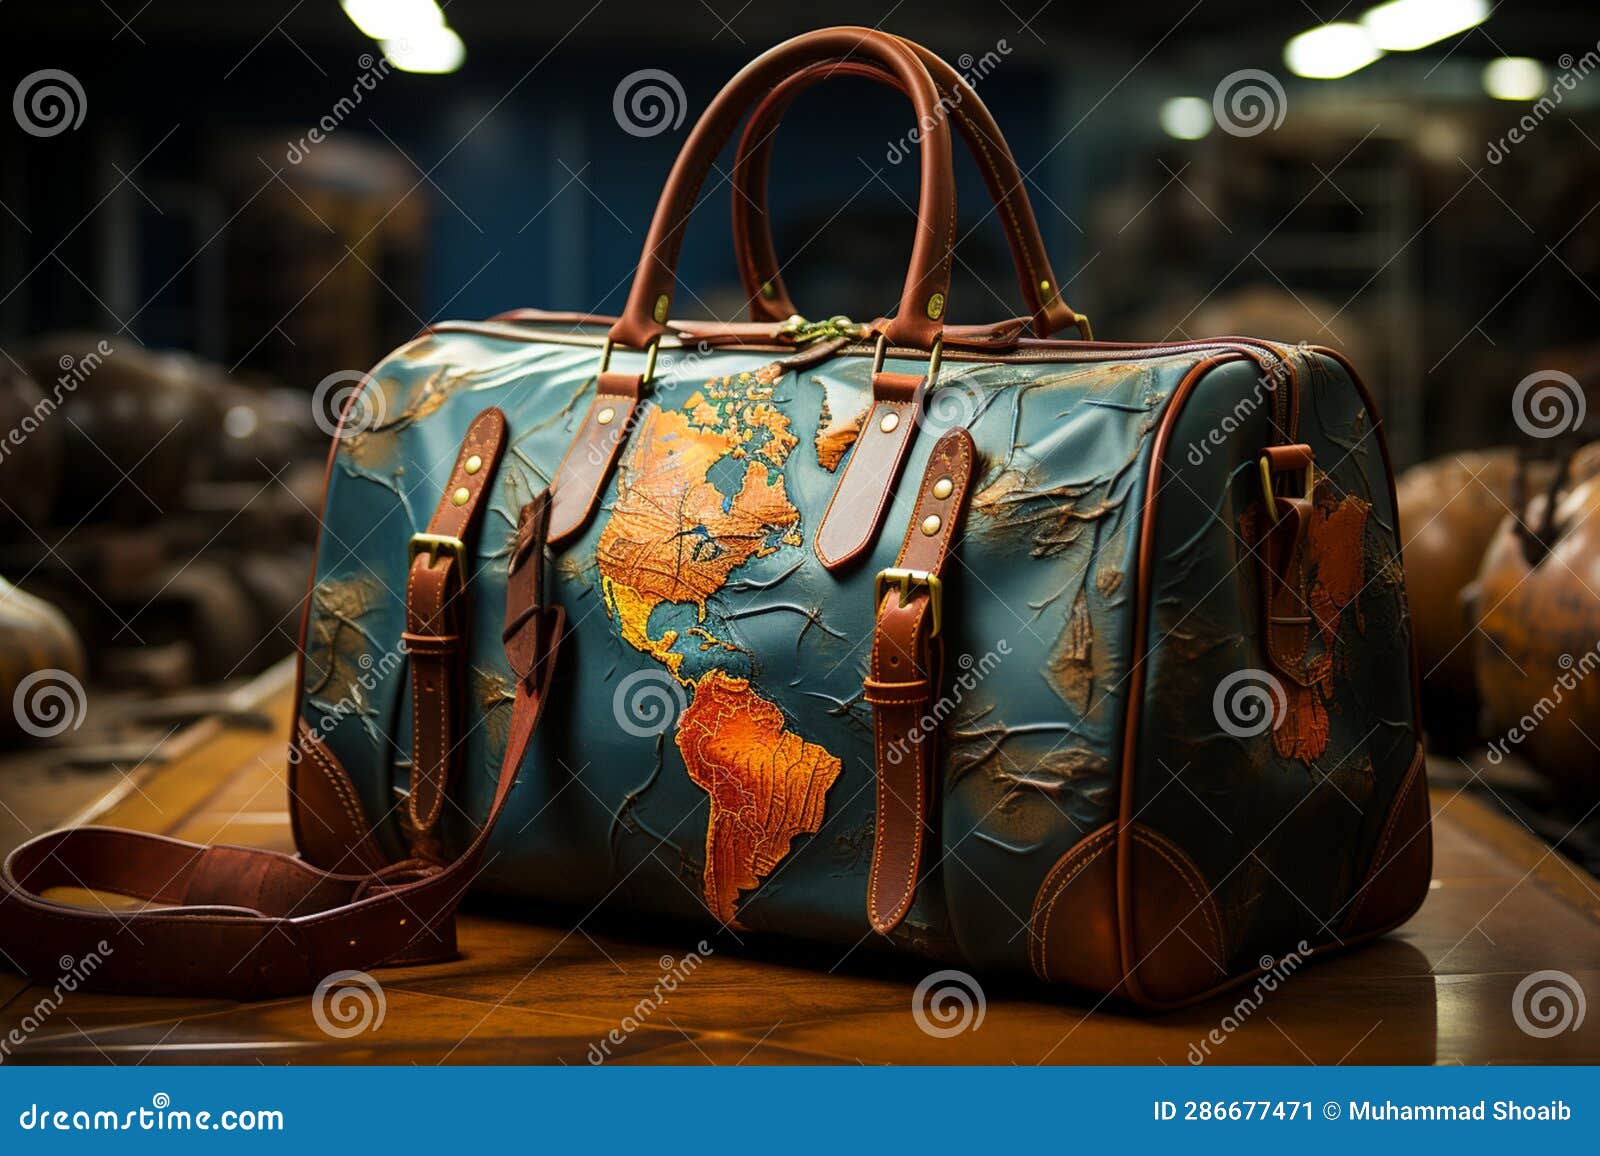 globetrotter s laundry, travel themed bag adorned with world map print